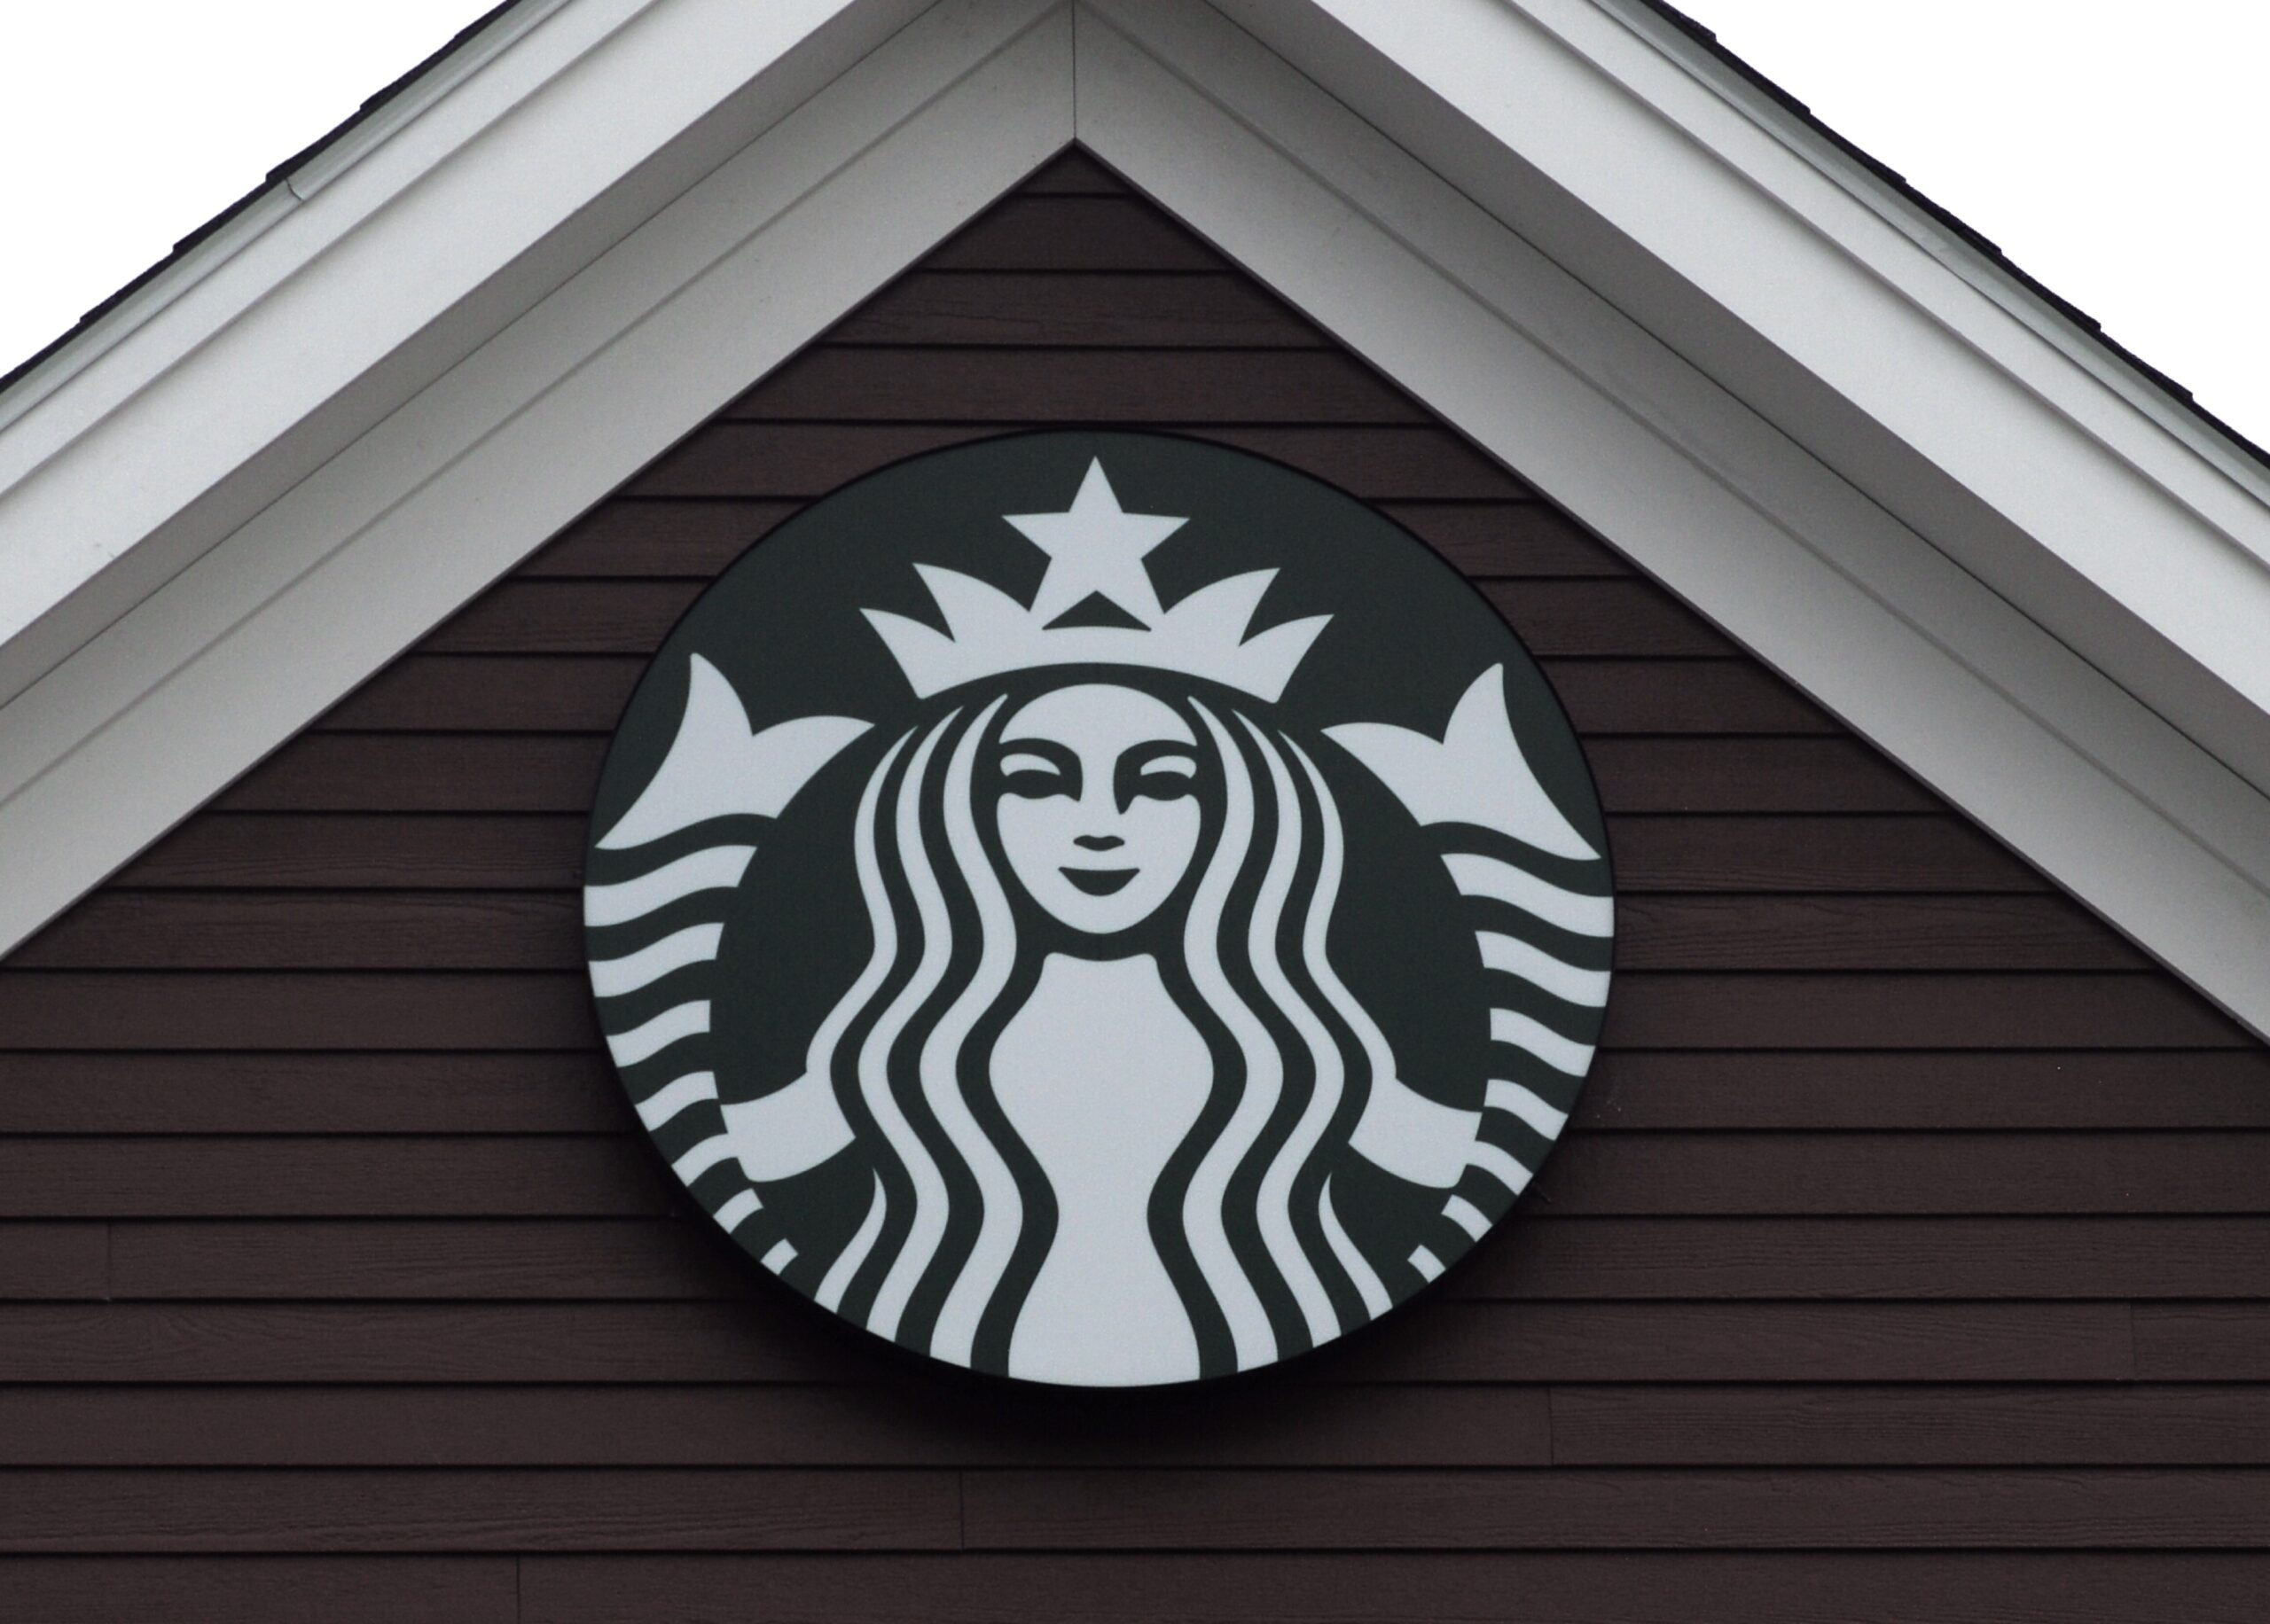 Starbucks to open in South Africa